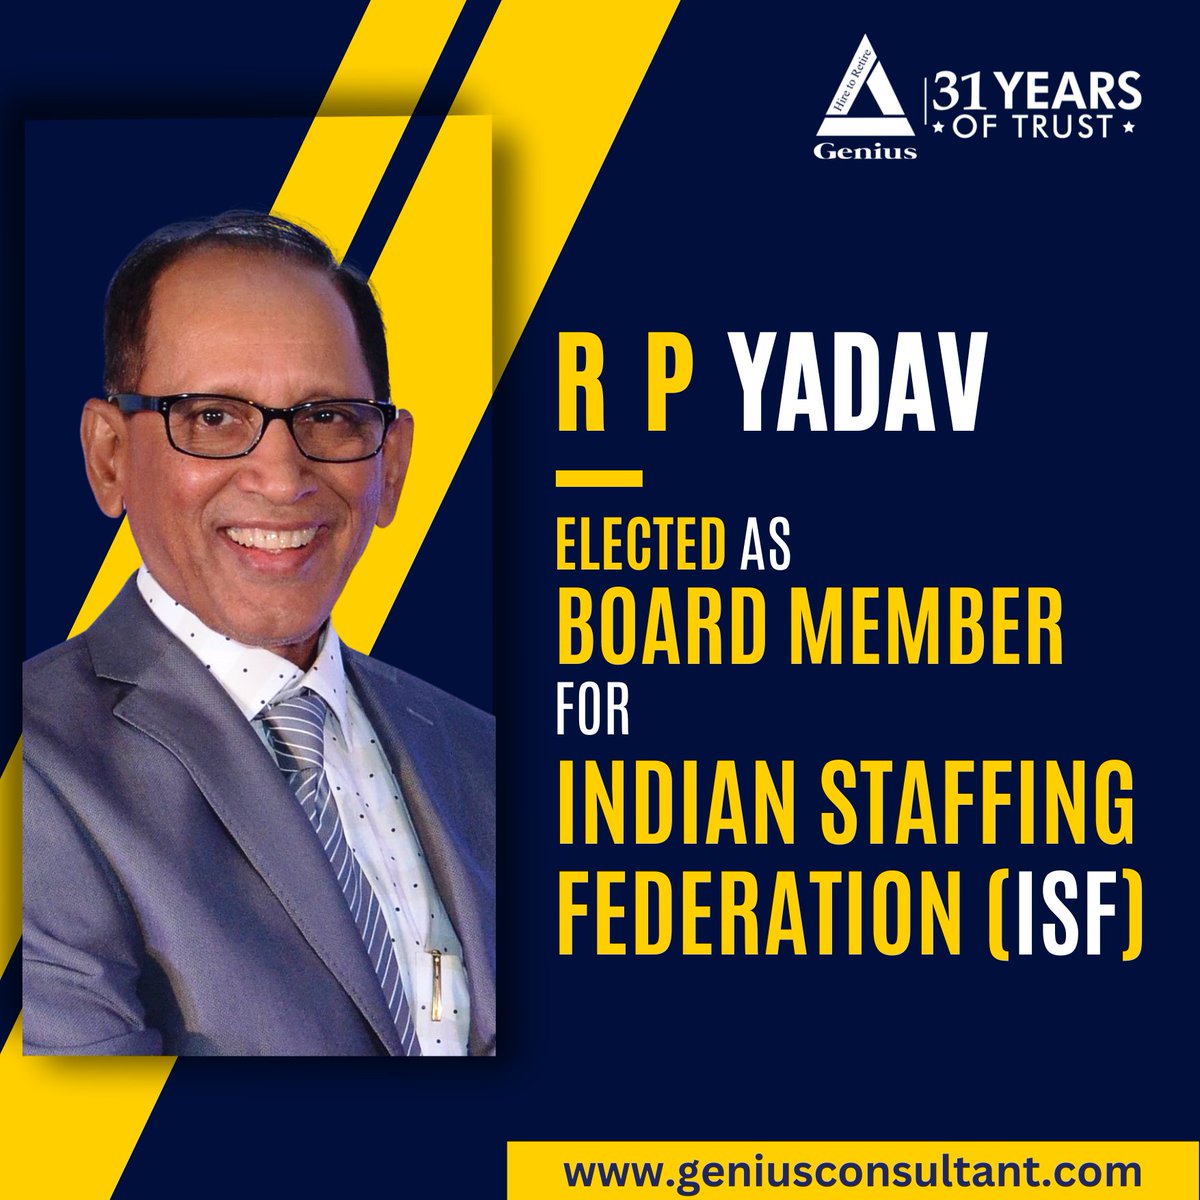 Exciting News! 
Mr. R P Yadav elected as board member of Indian Staffing Federation- ISF with overwhelming support. A proud moment for all of us at Genius Consultants Ltd.! 

 #GeniusConsultants #ISFboardmember #rpyadav